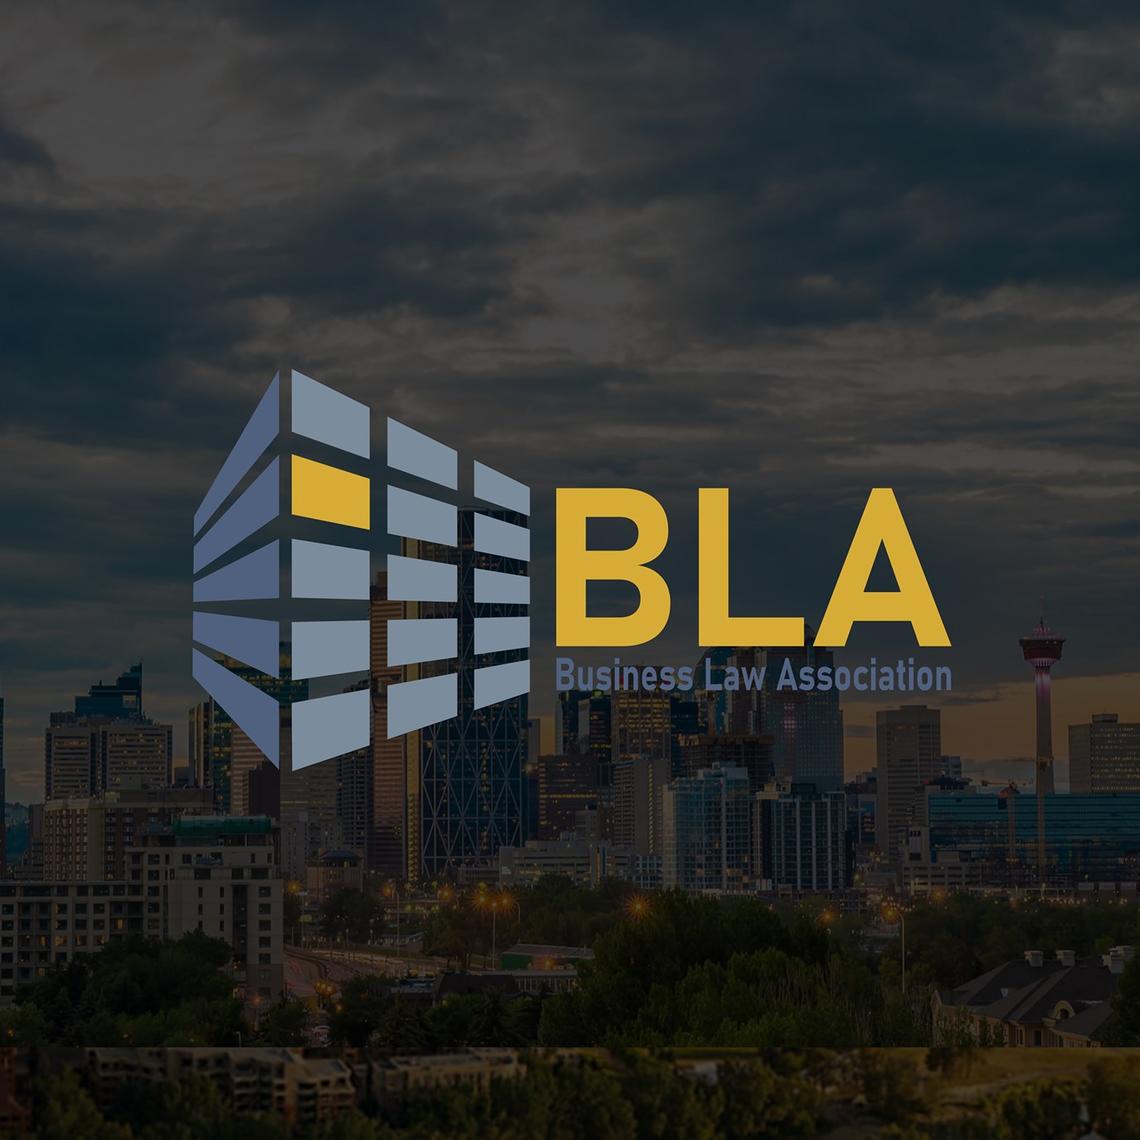 Business Law Association logo on a background of the city of Calgary.